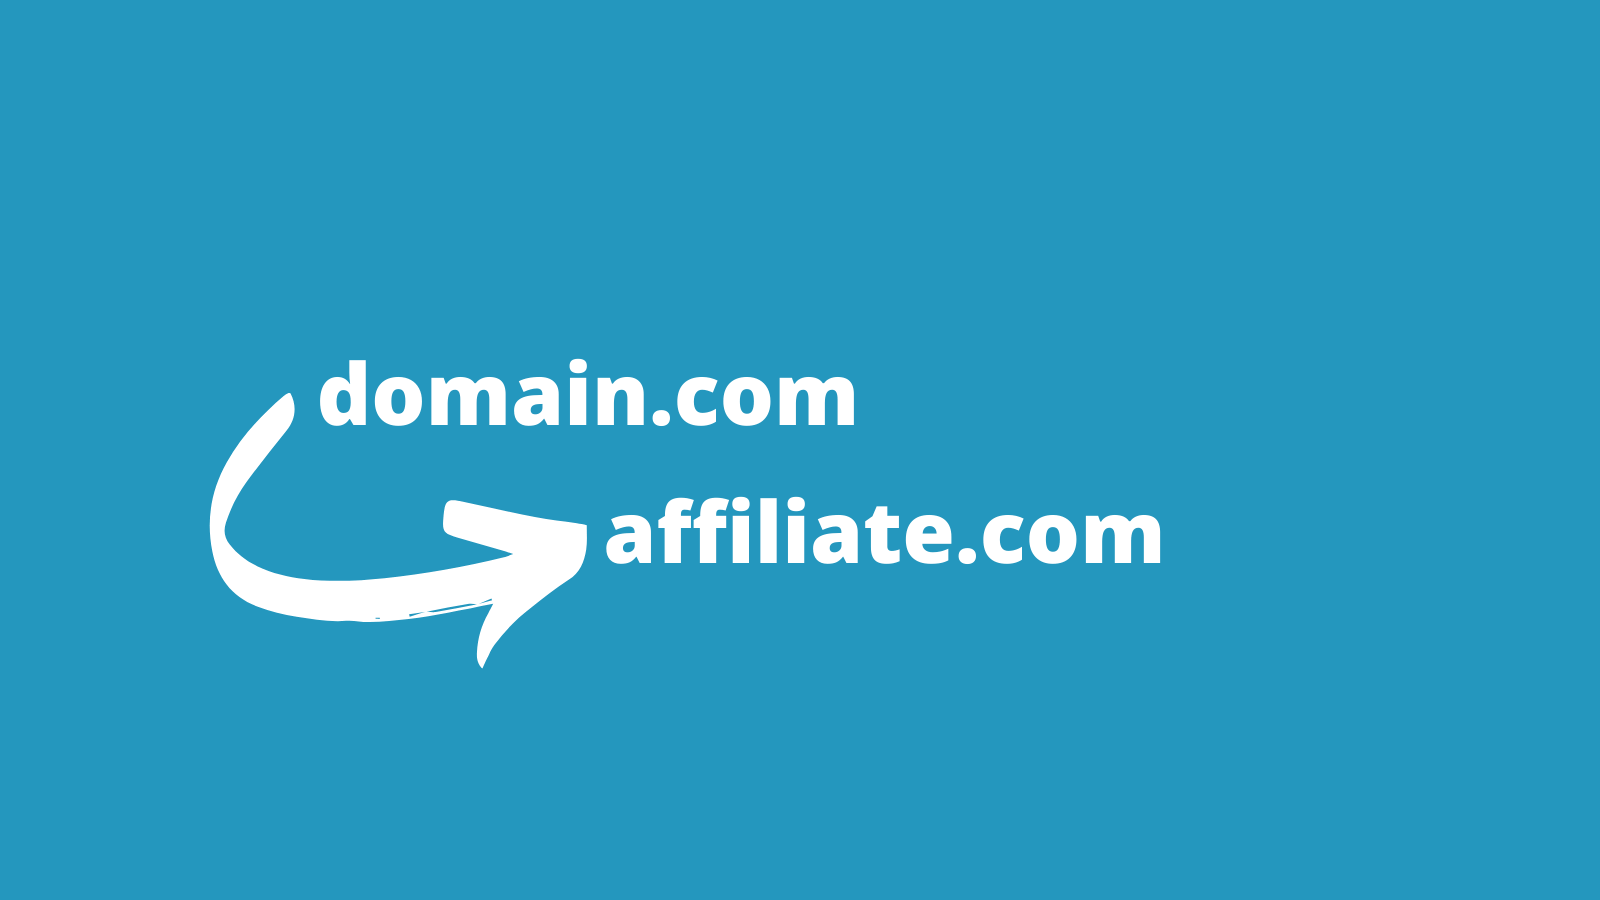 An arrow pointing from "domain.com" to "redirect.com"